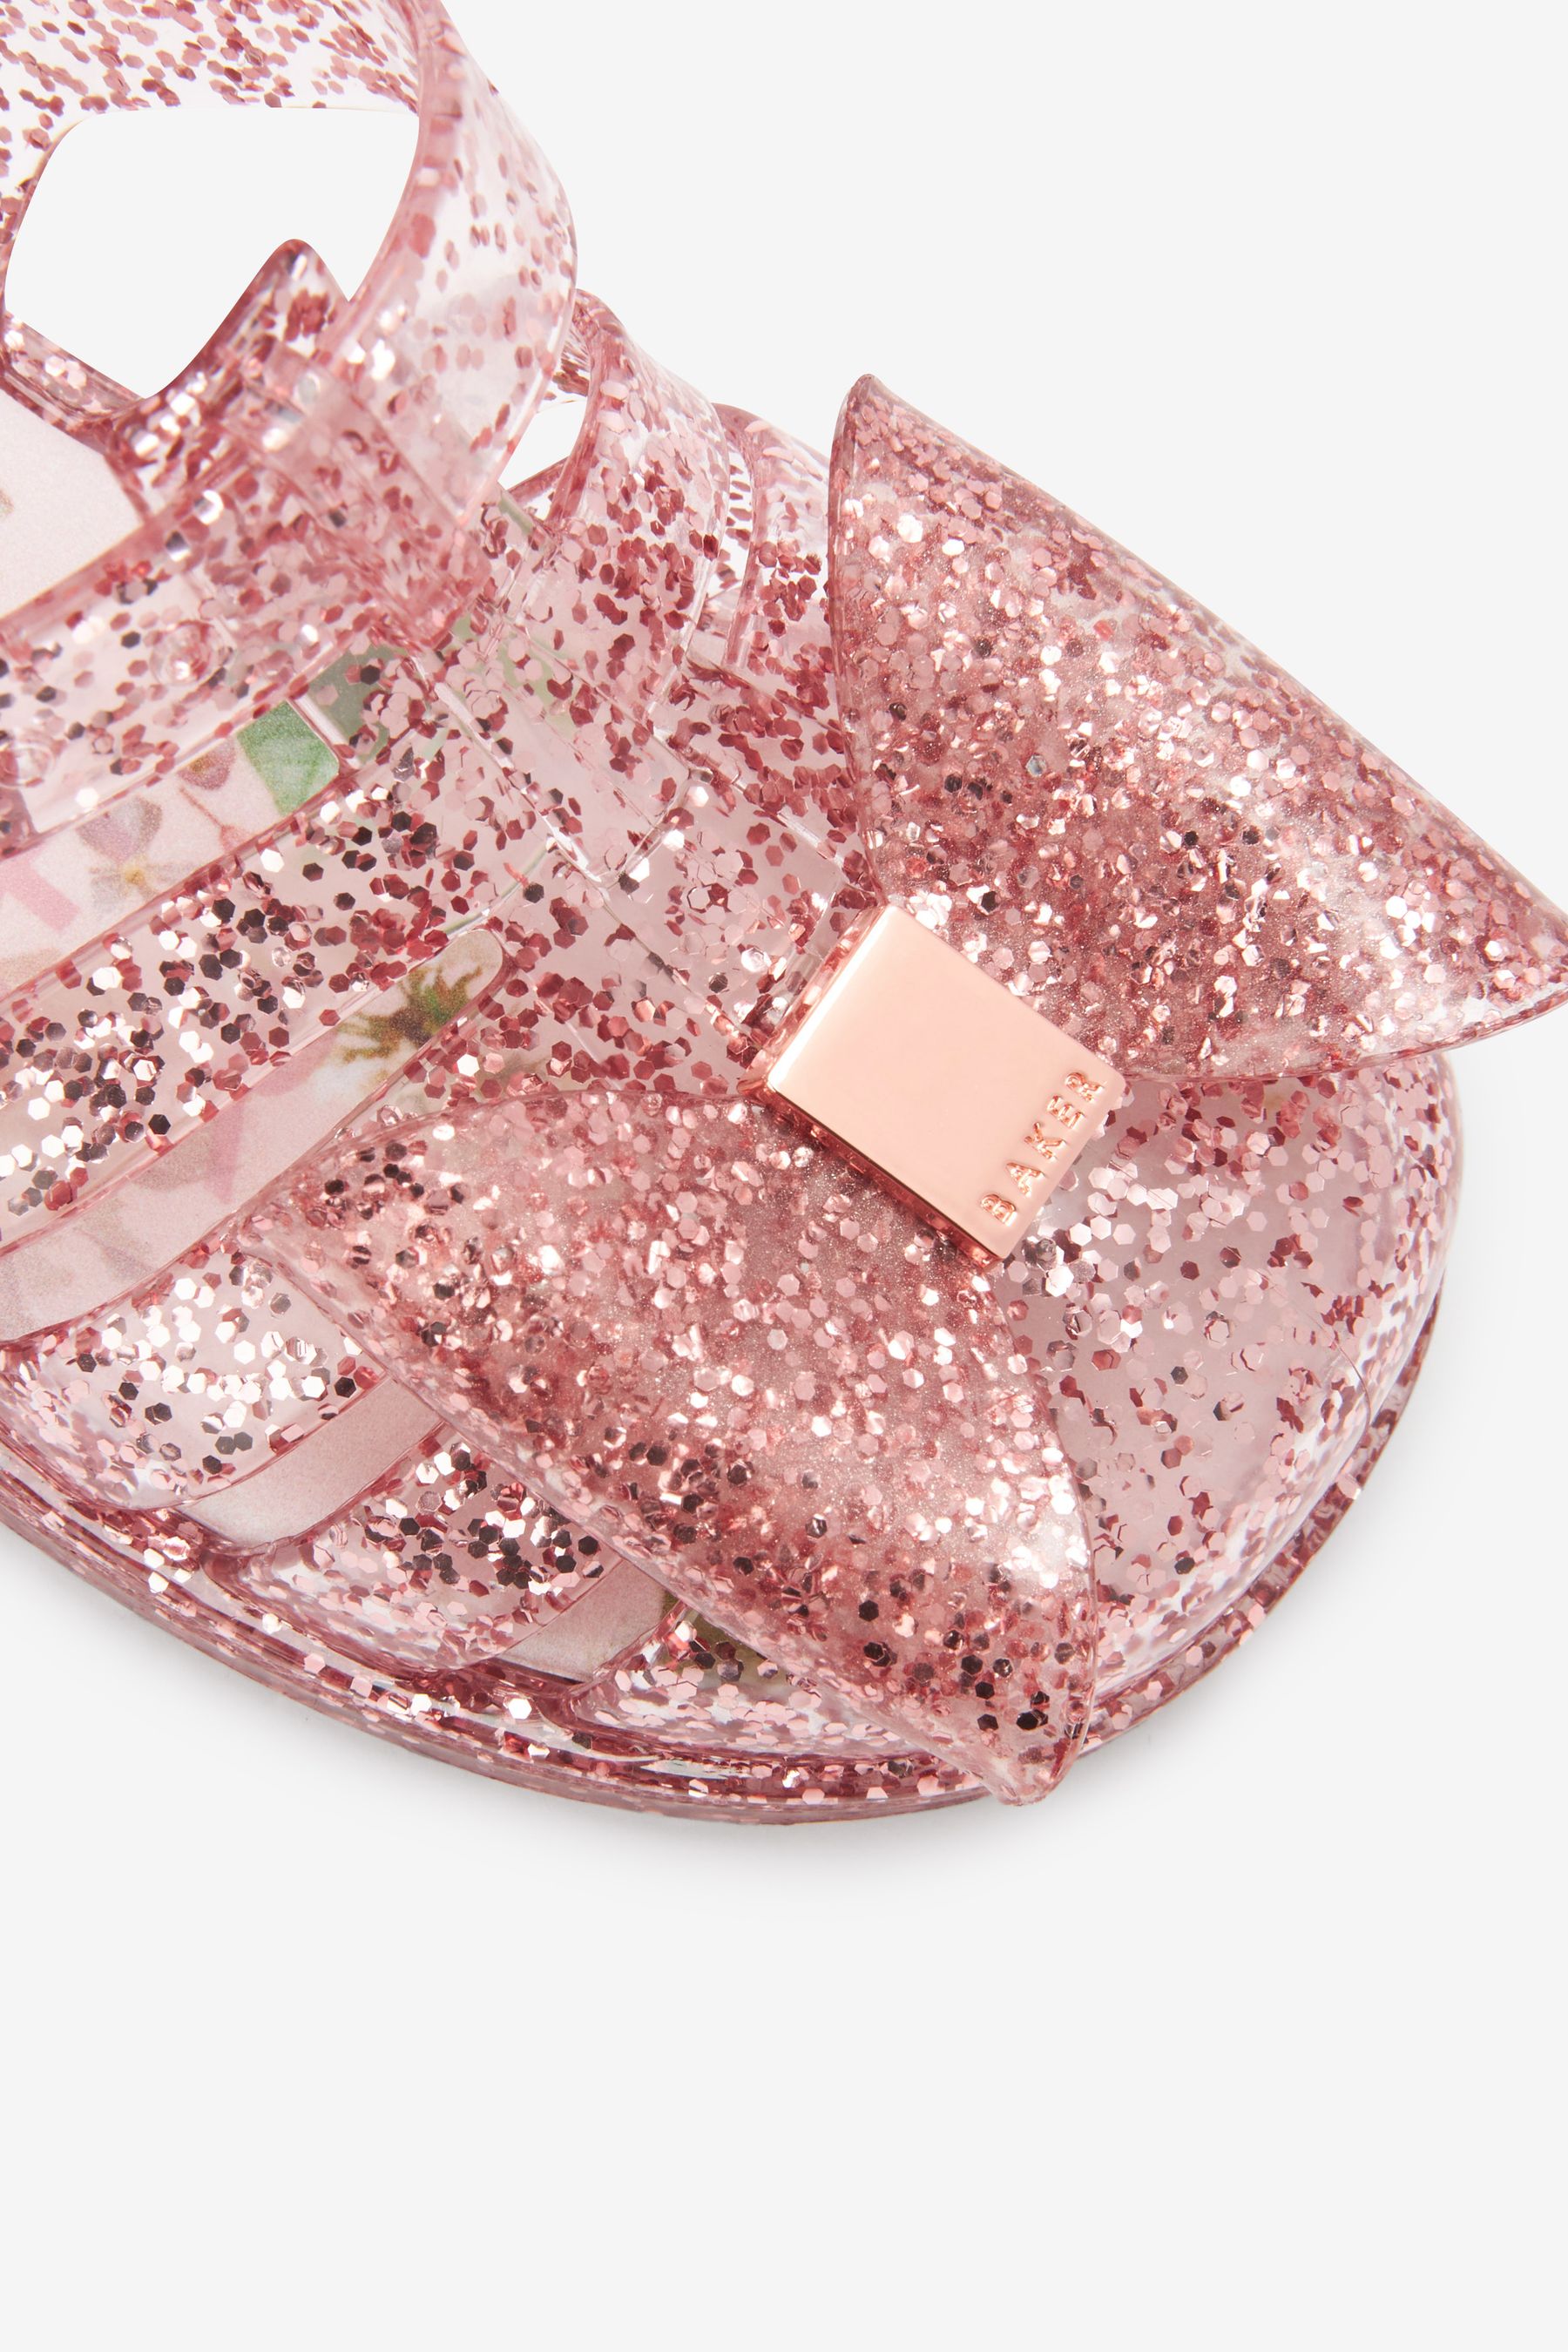 Buy Gap Glitter Jelly Sandals from the Gap online shop